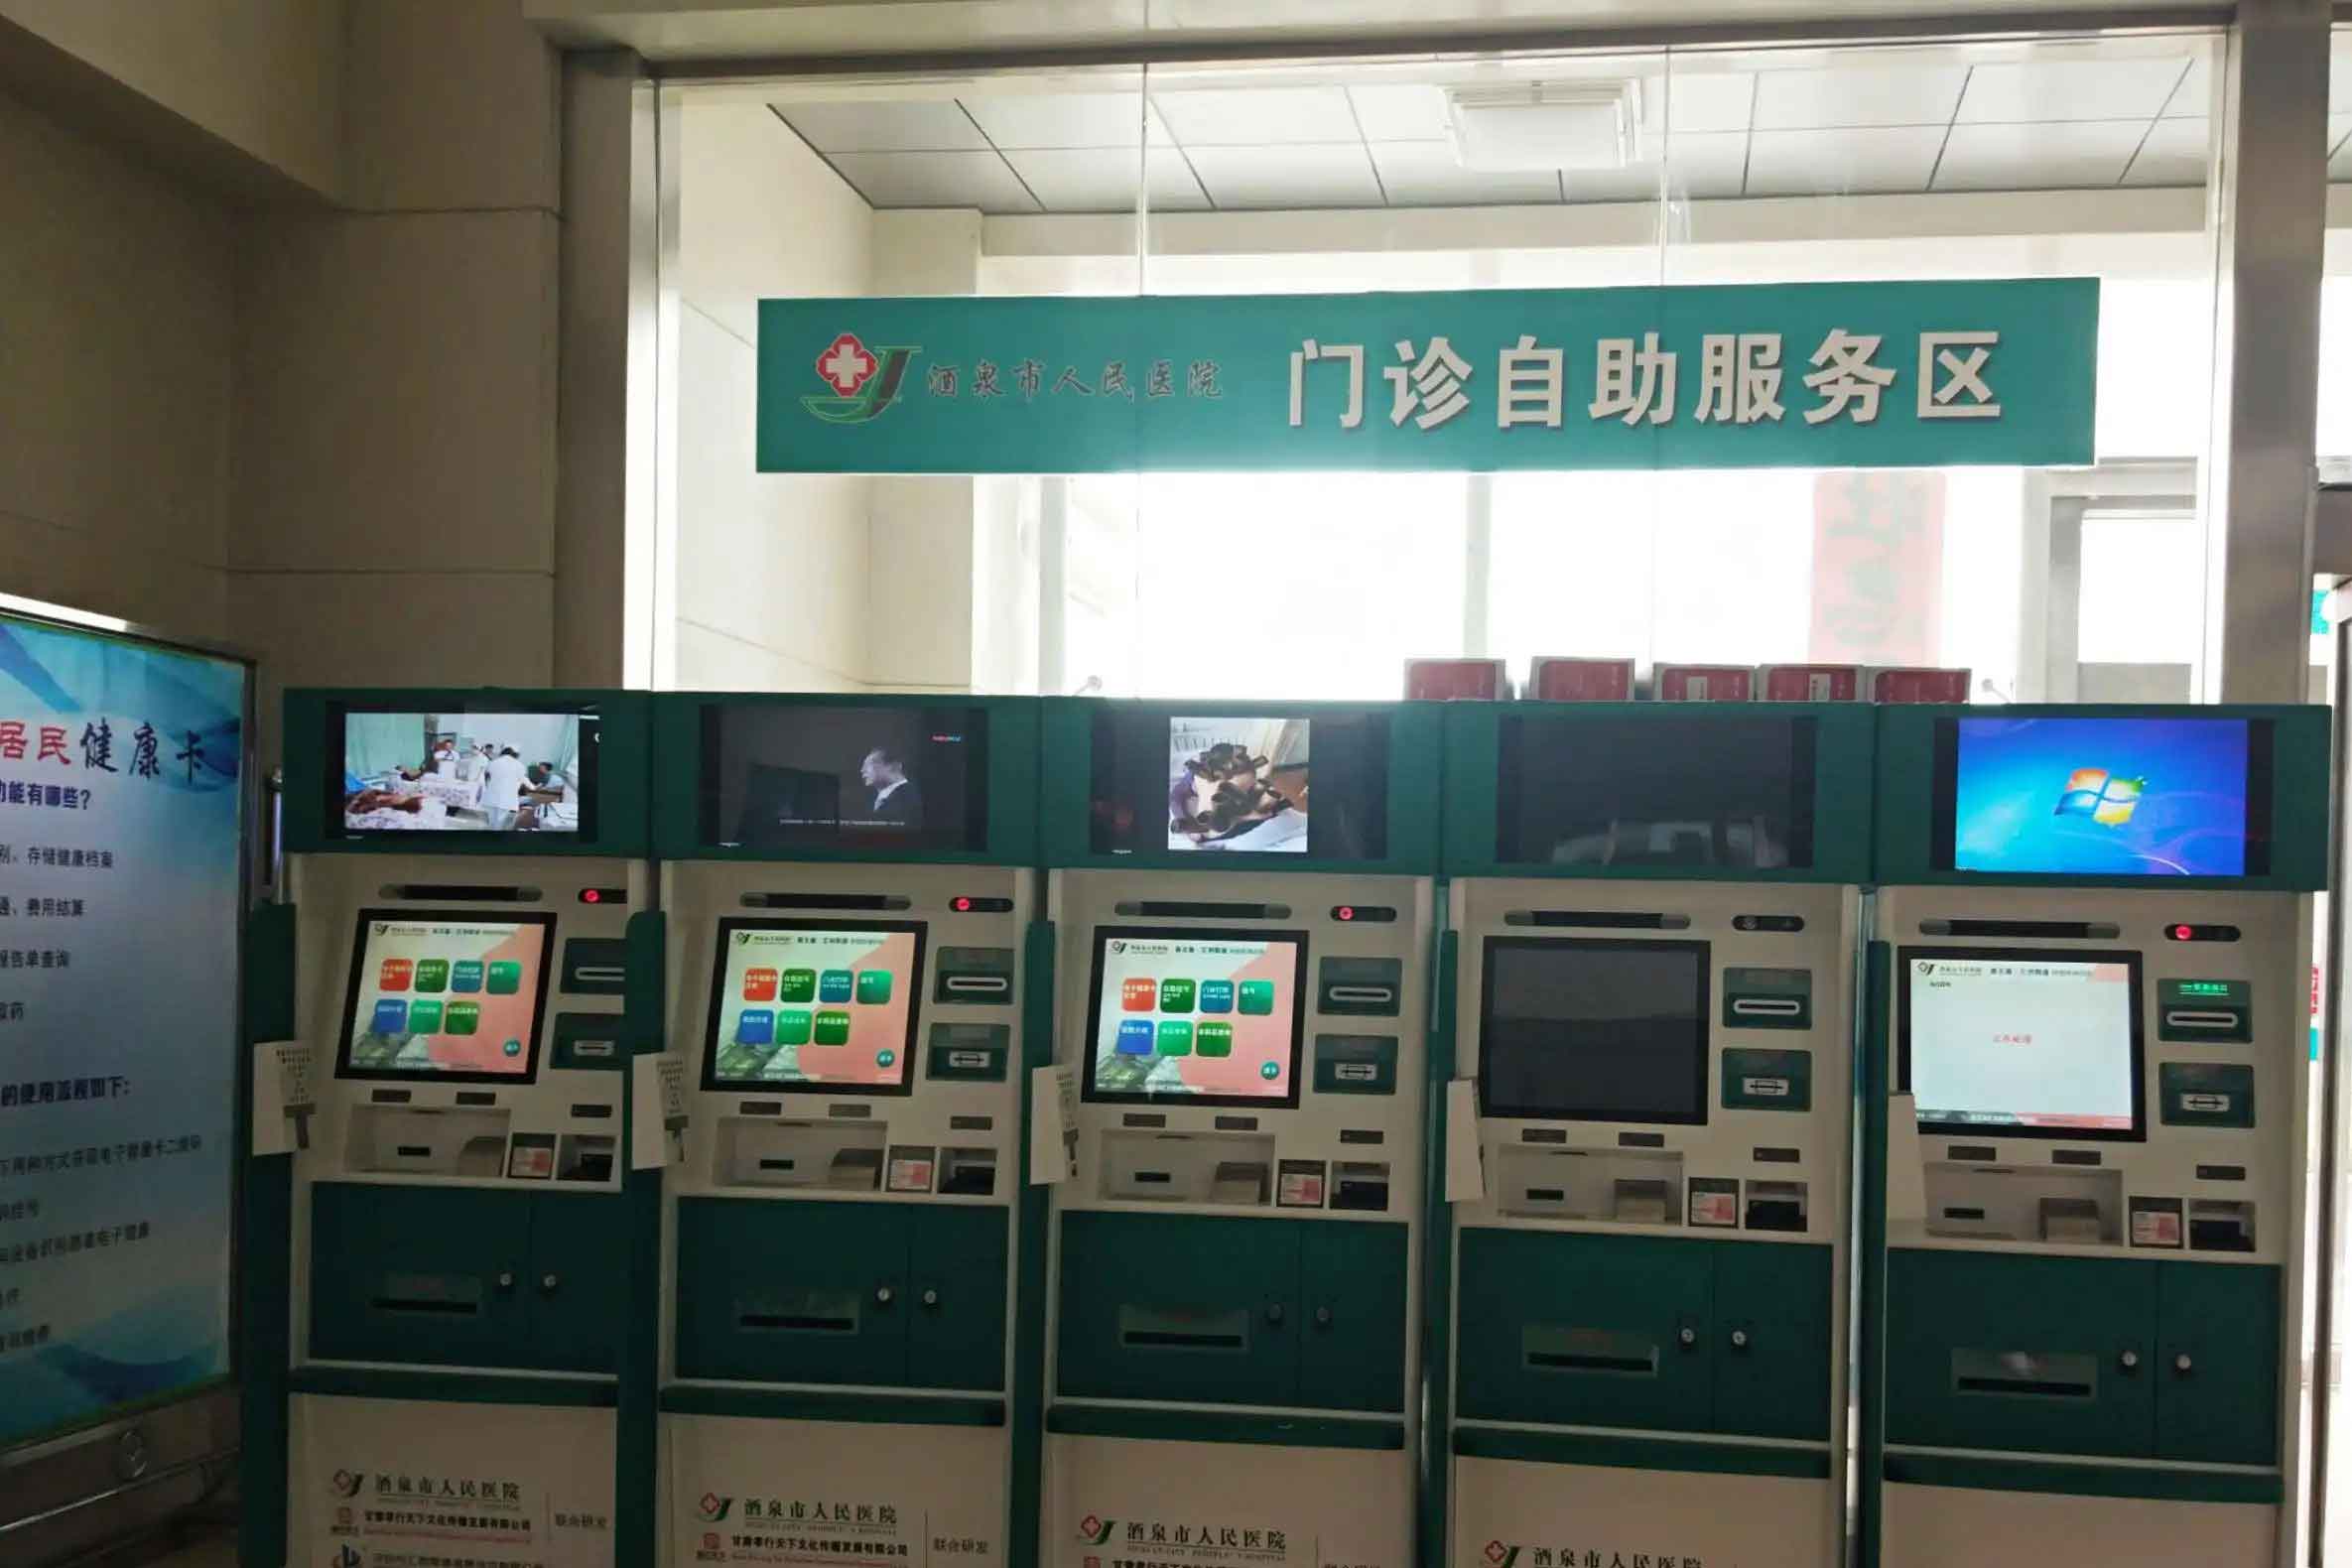 Industrial All-in-one Panel PCs Applied to Garbage Sorting